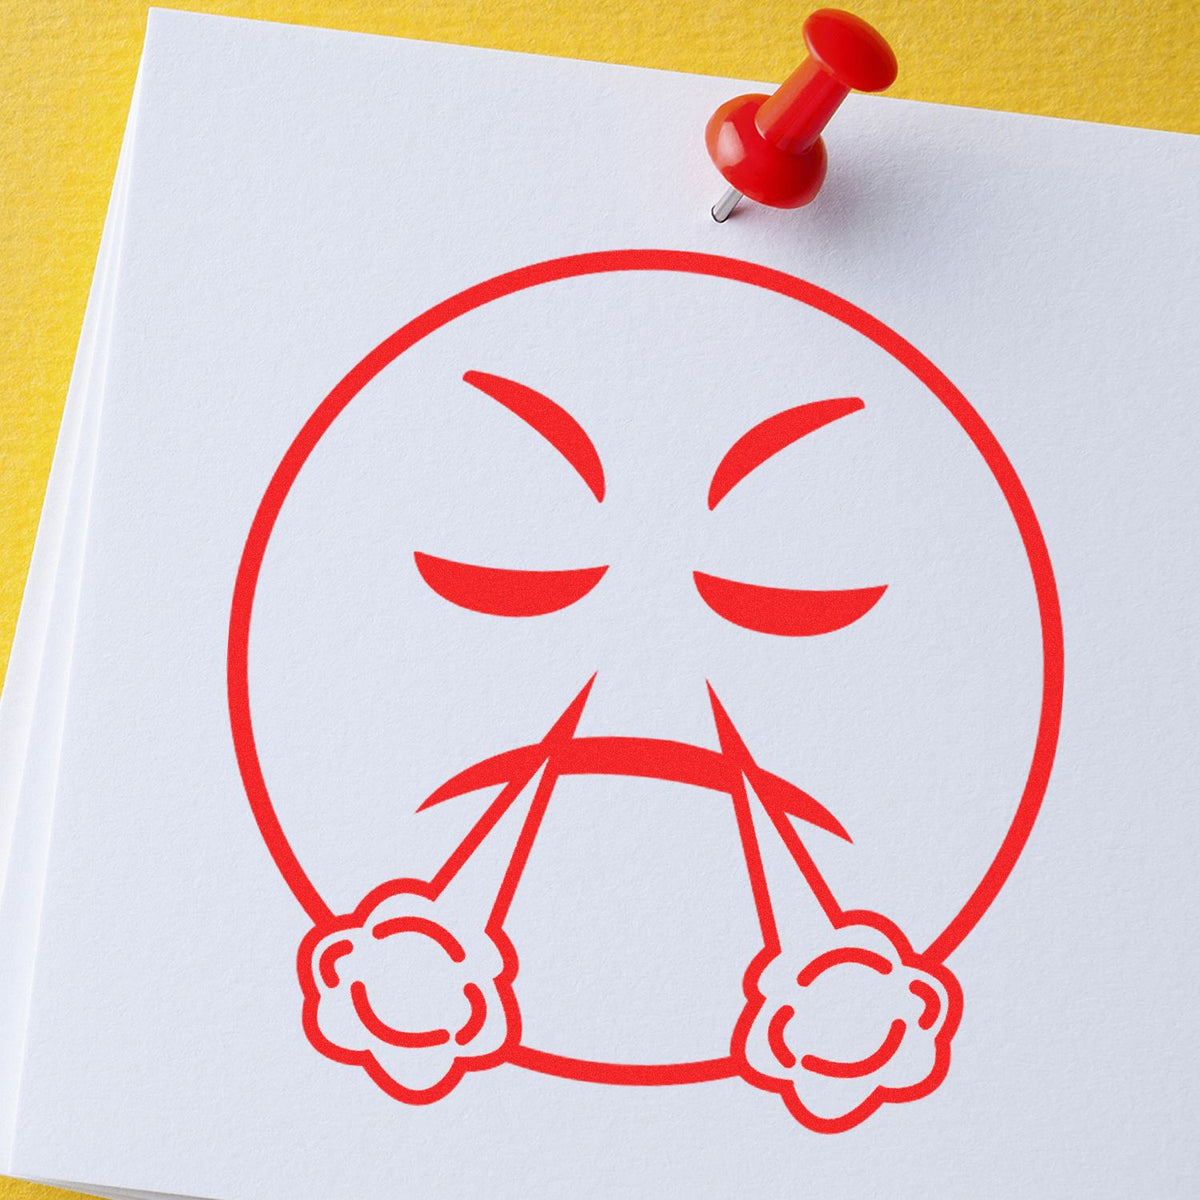 Round Angry Smiley Rubber Stamp In Use Photo